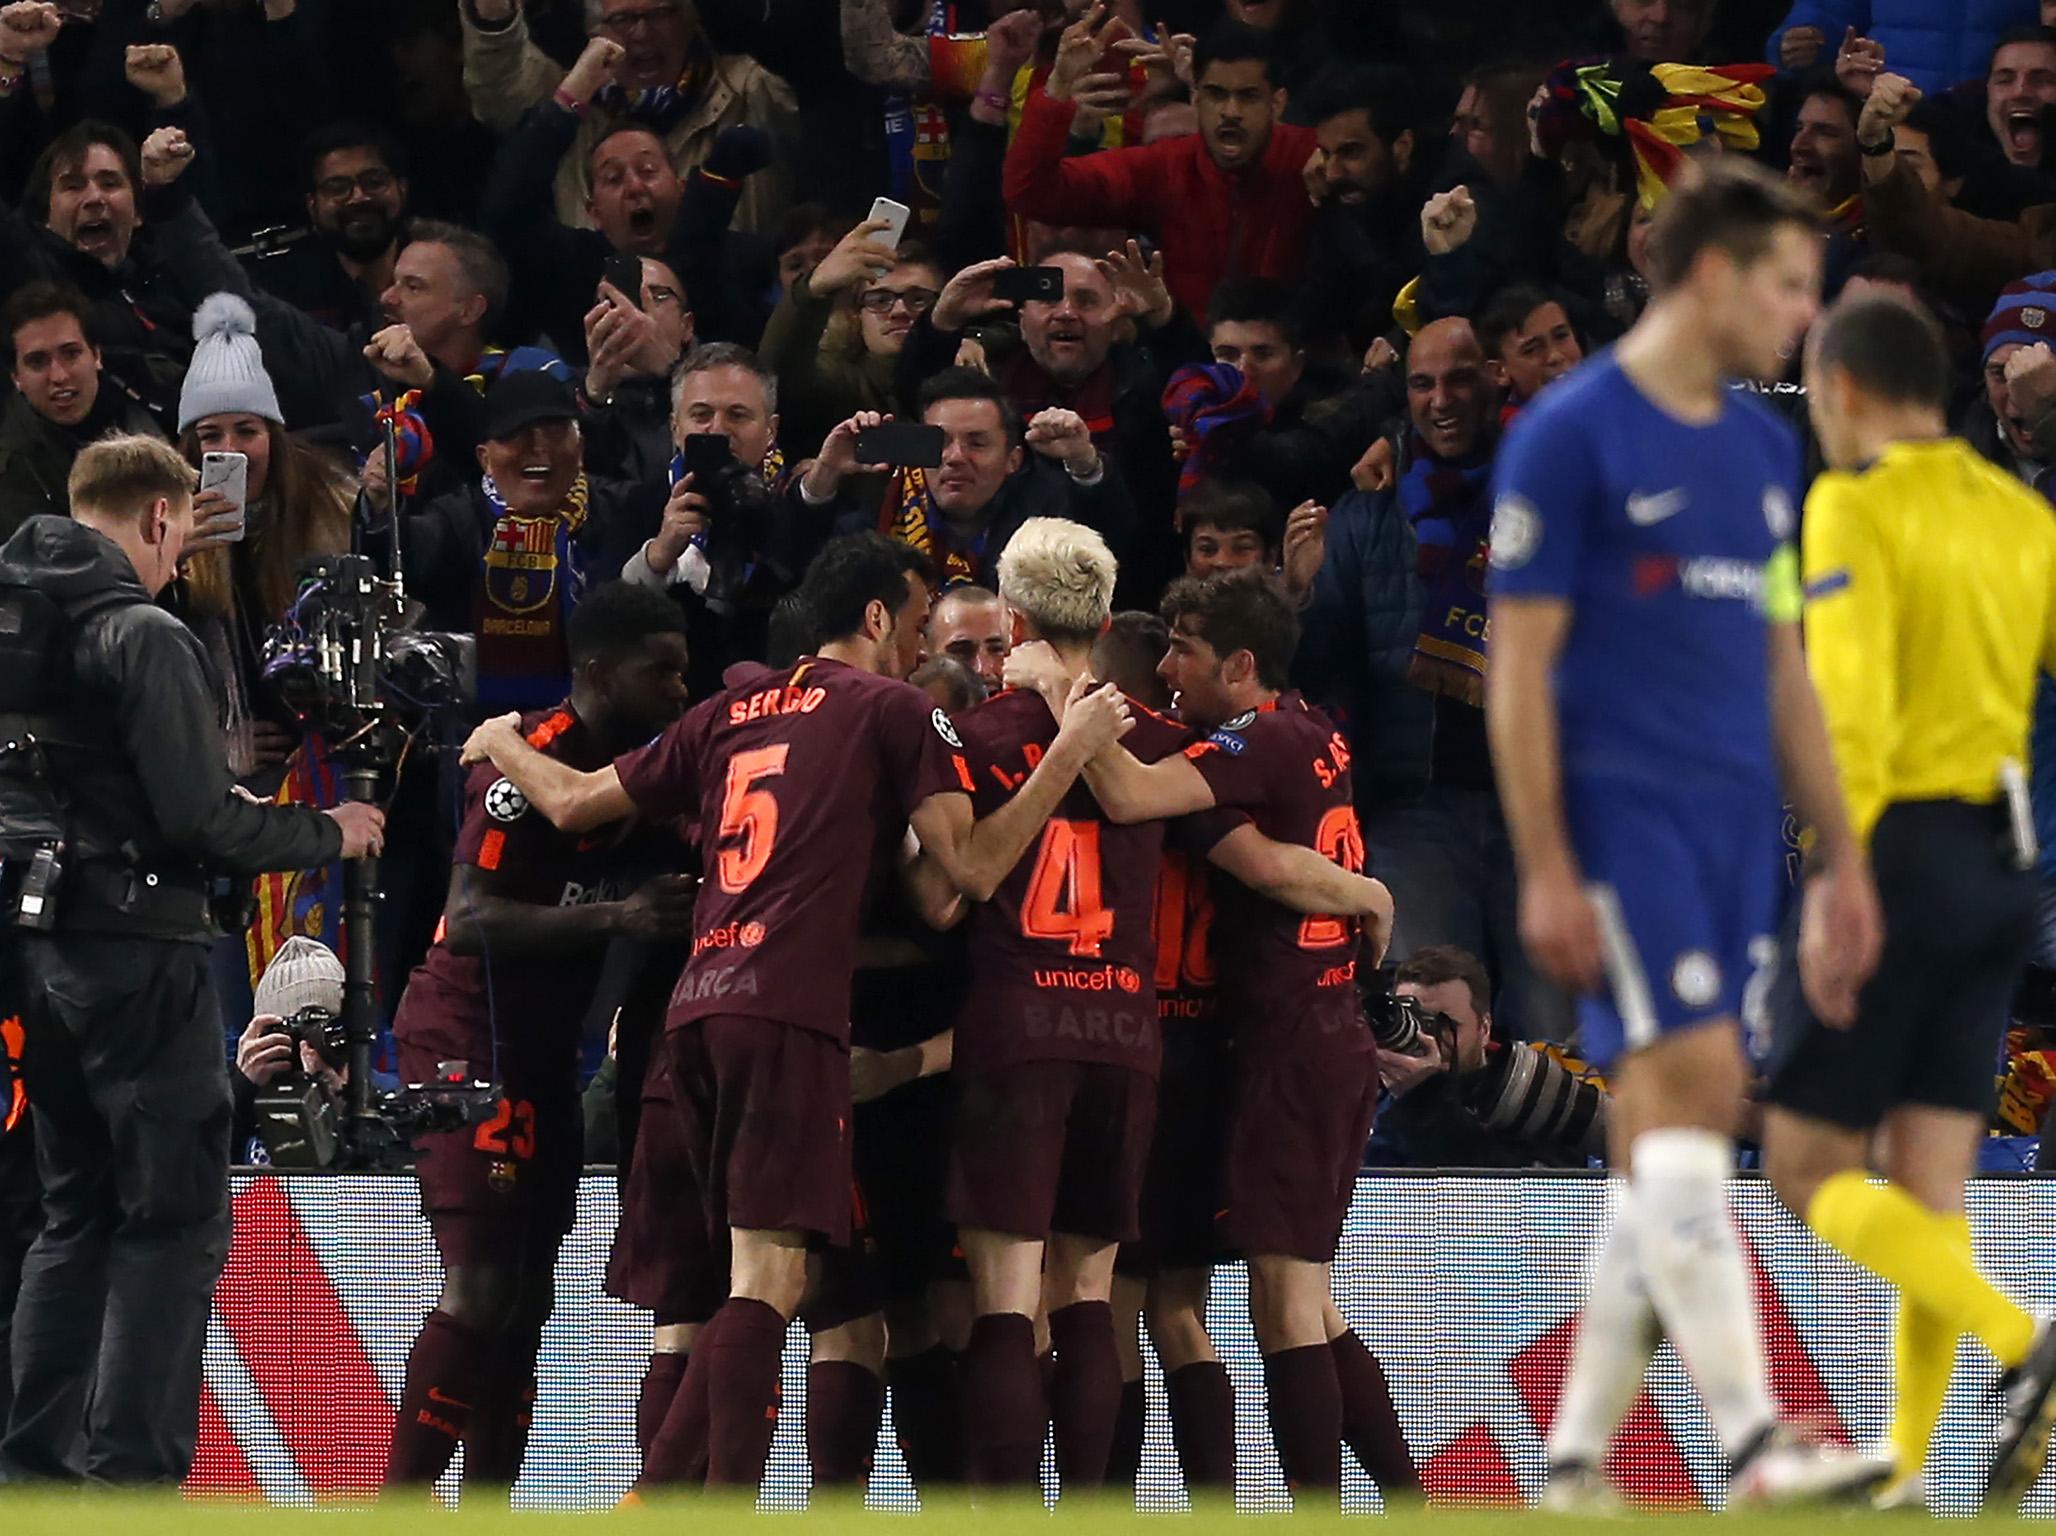 'There were no spontaneous outpourings of elation as Barcelona celebrated'